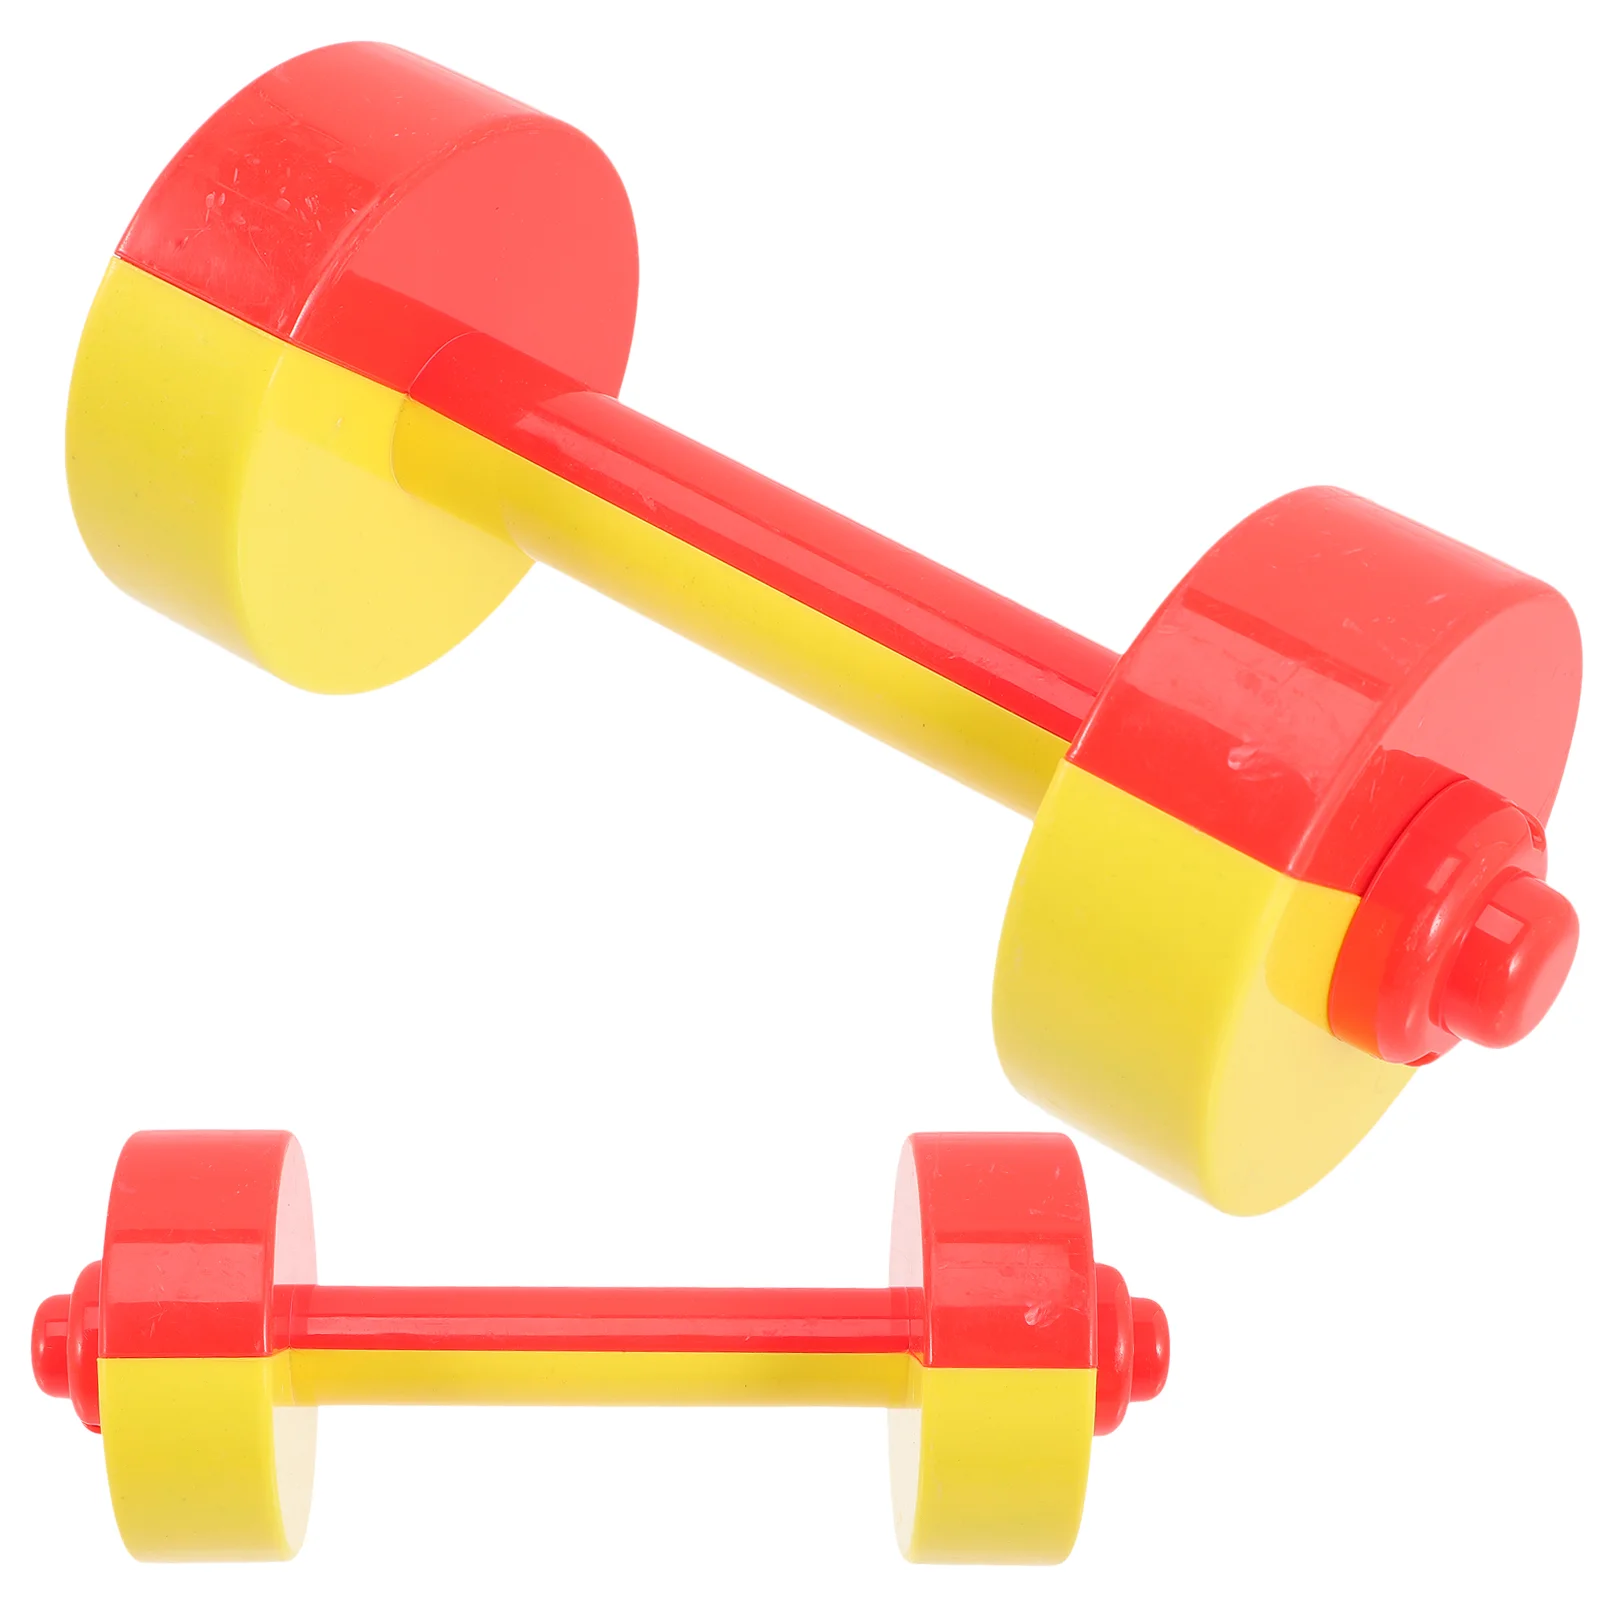 

Toys Kids Toy Outdoor Exercise Barbells Children Gym Fitness Plastic Dumbbells Barbell Equipment Dumbbell Playsets Workout